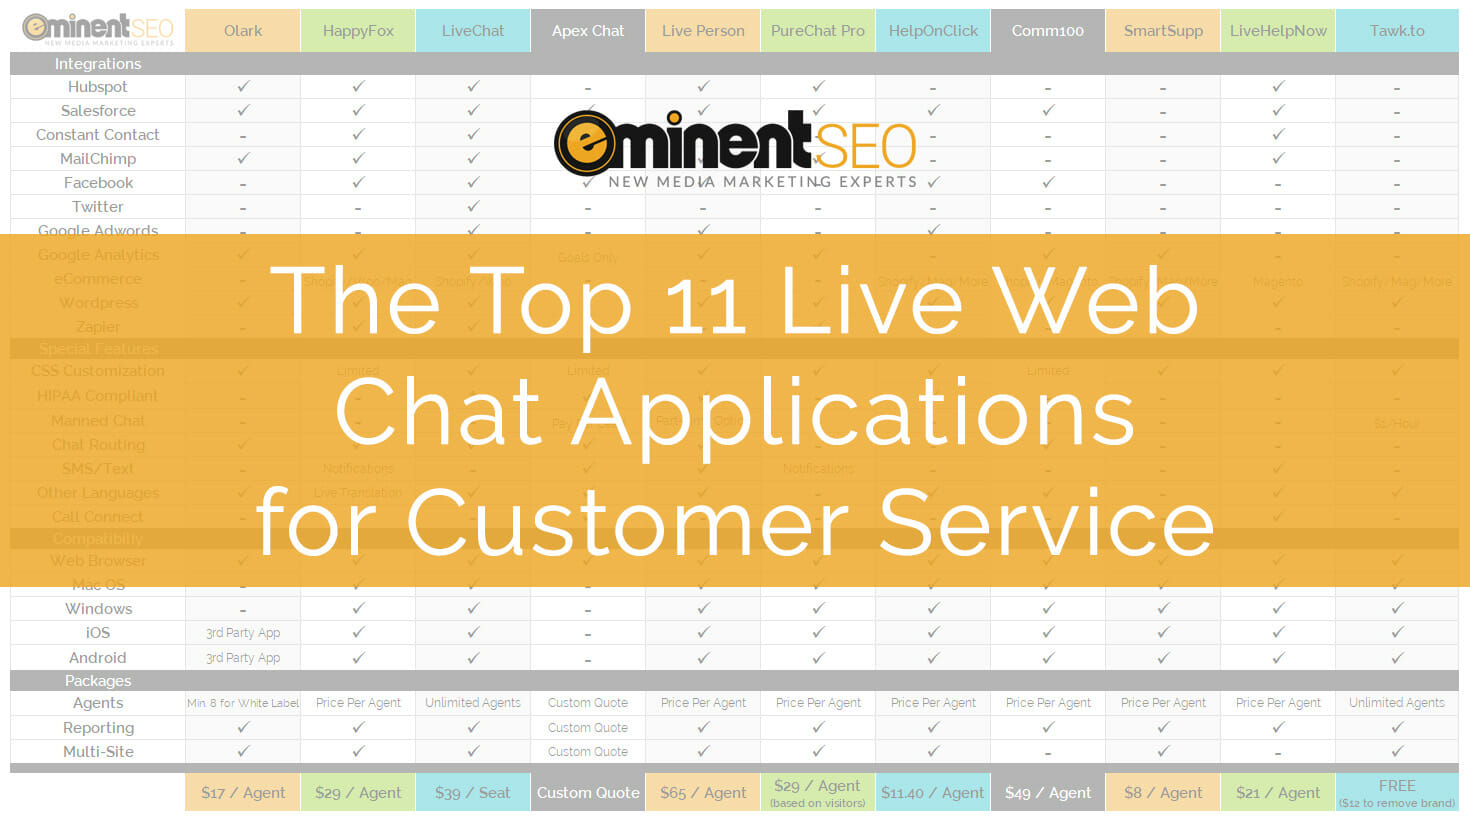 Top 11 Live Web Chat Apps For Customer Service - Eminent SEO